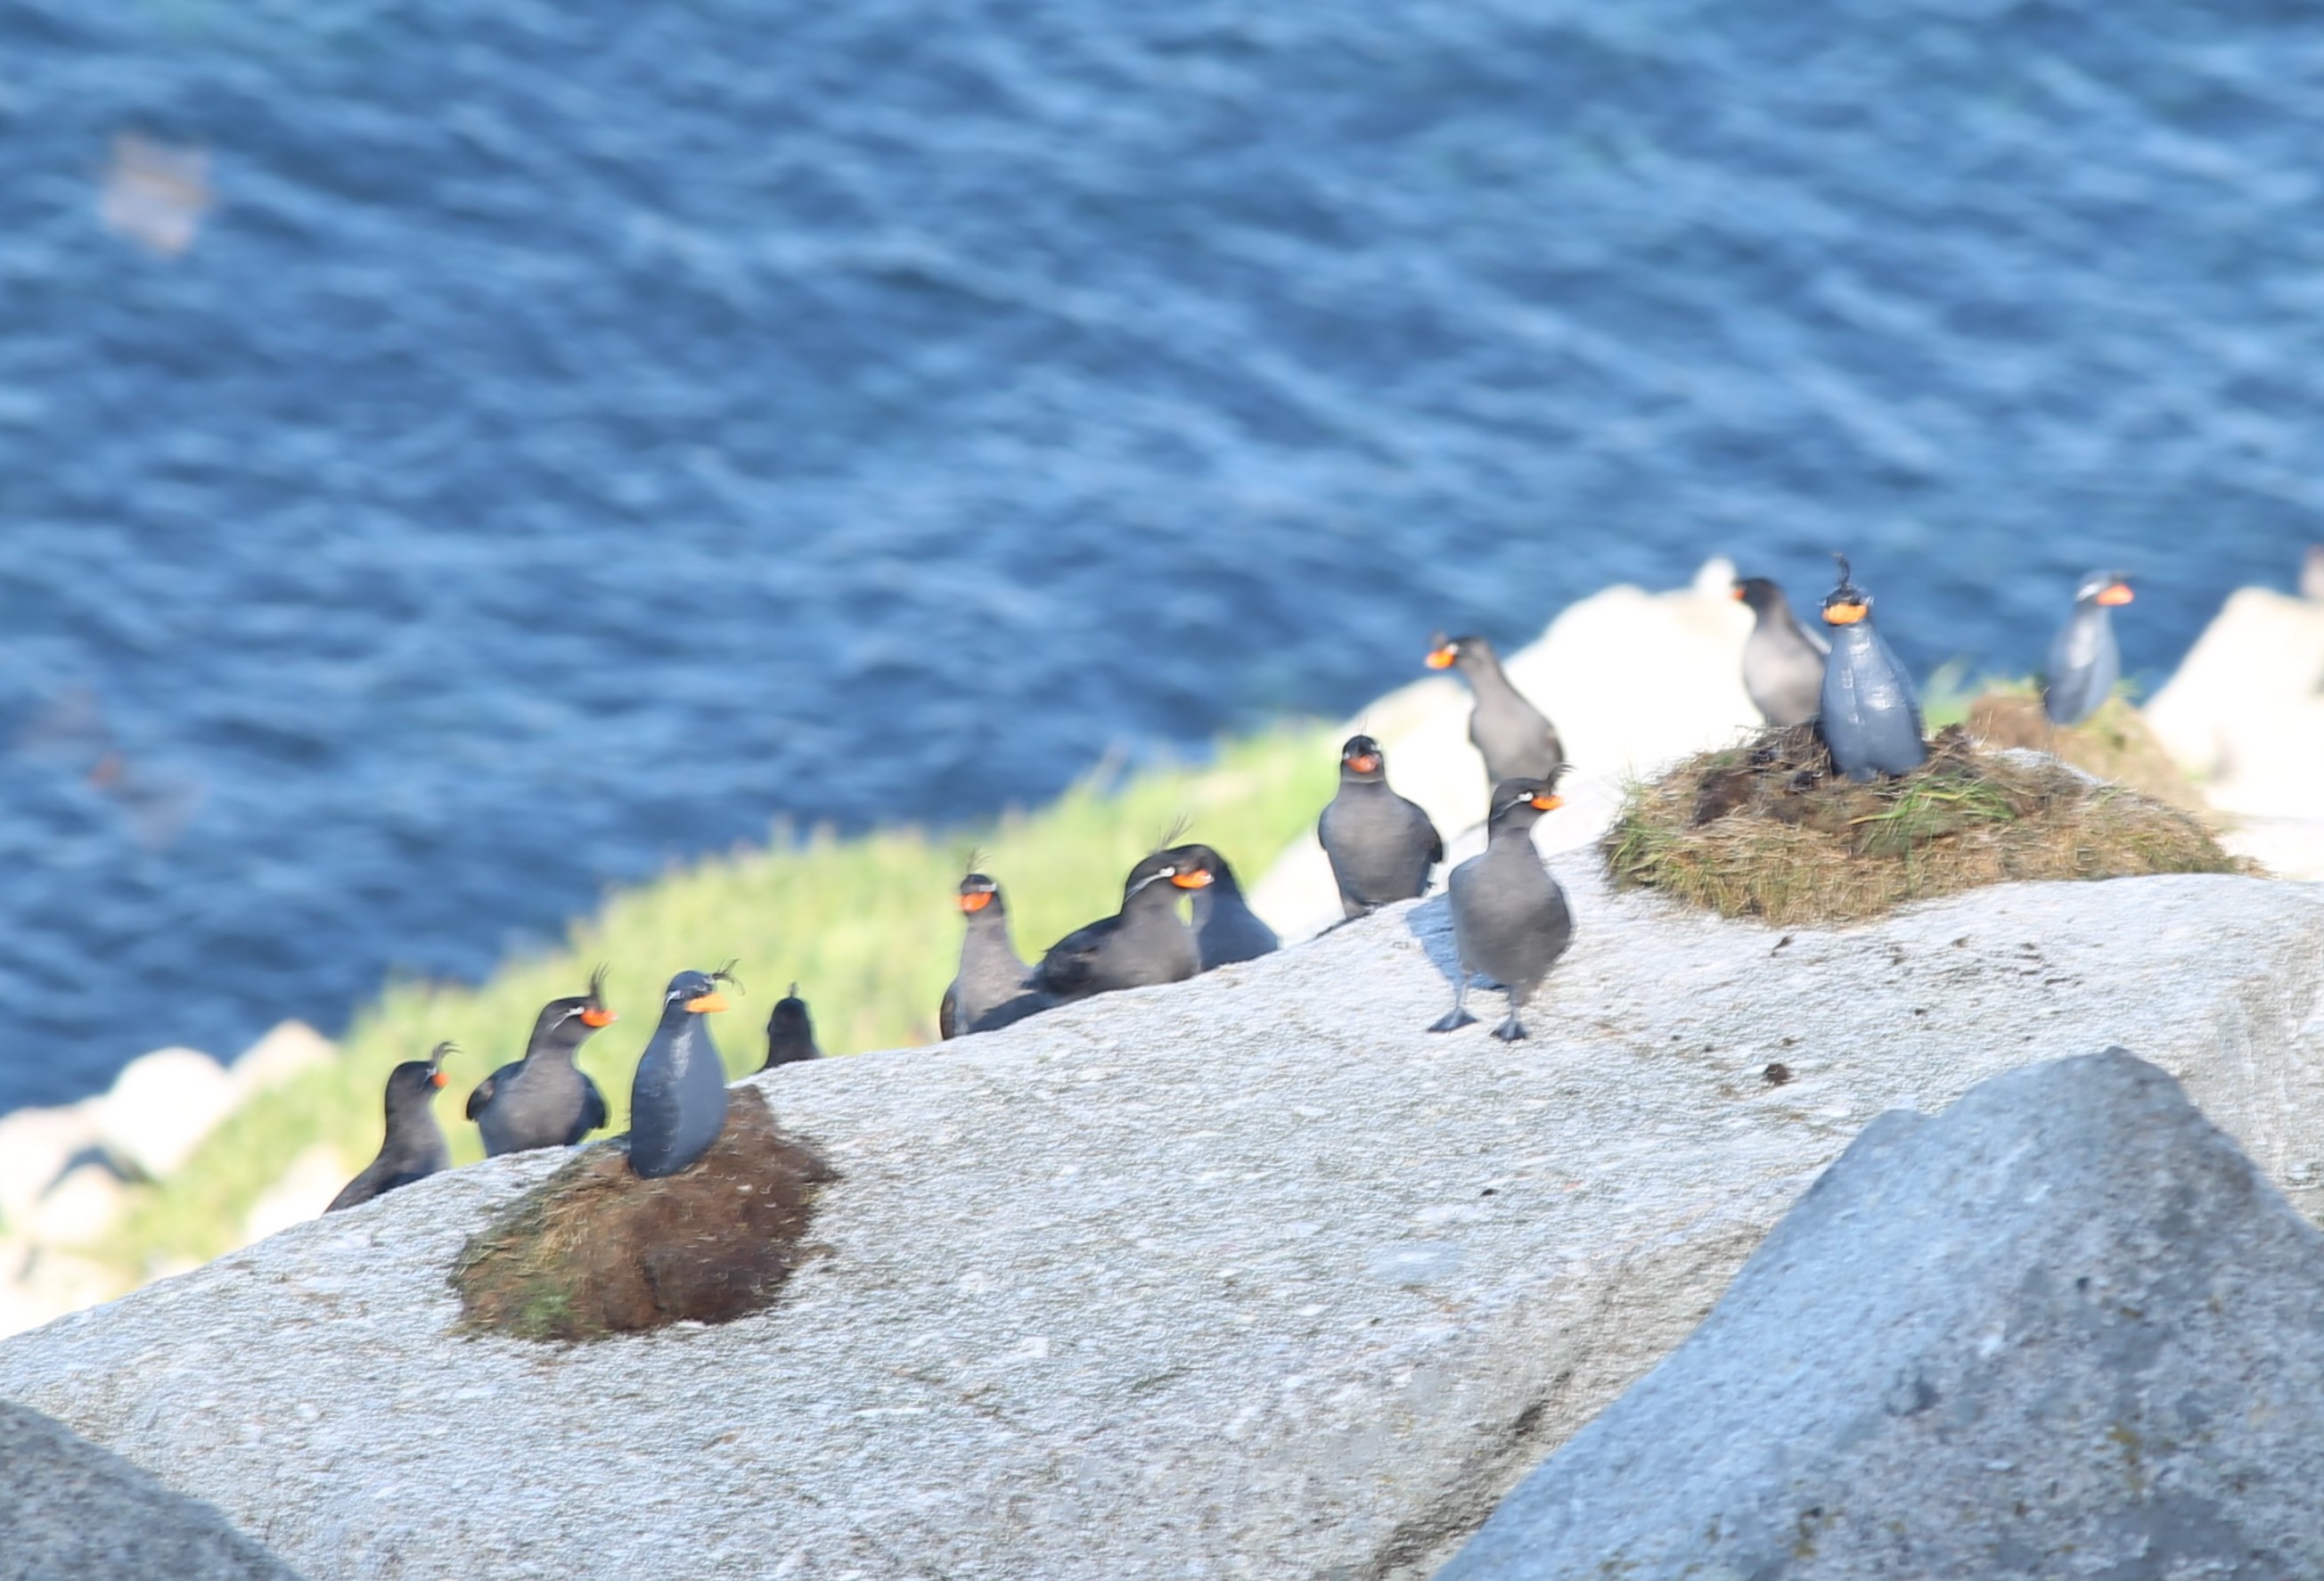 Crested auklets stand among plastic decoy auklets on shoreline rocks, with ocean water in the background.